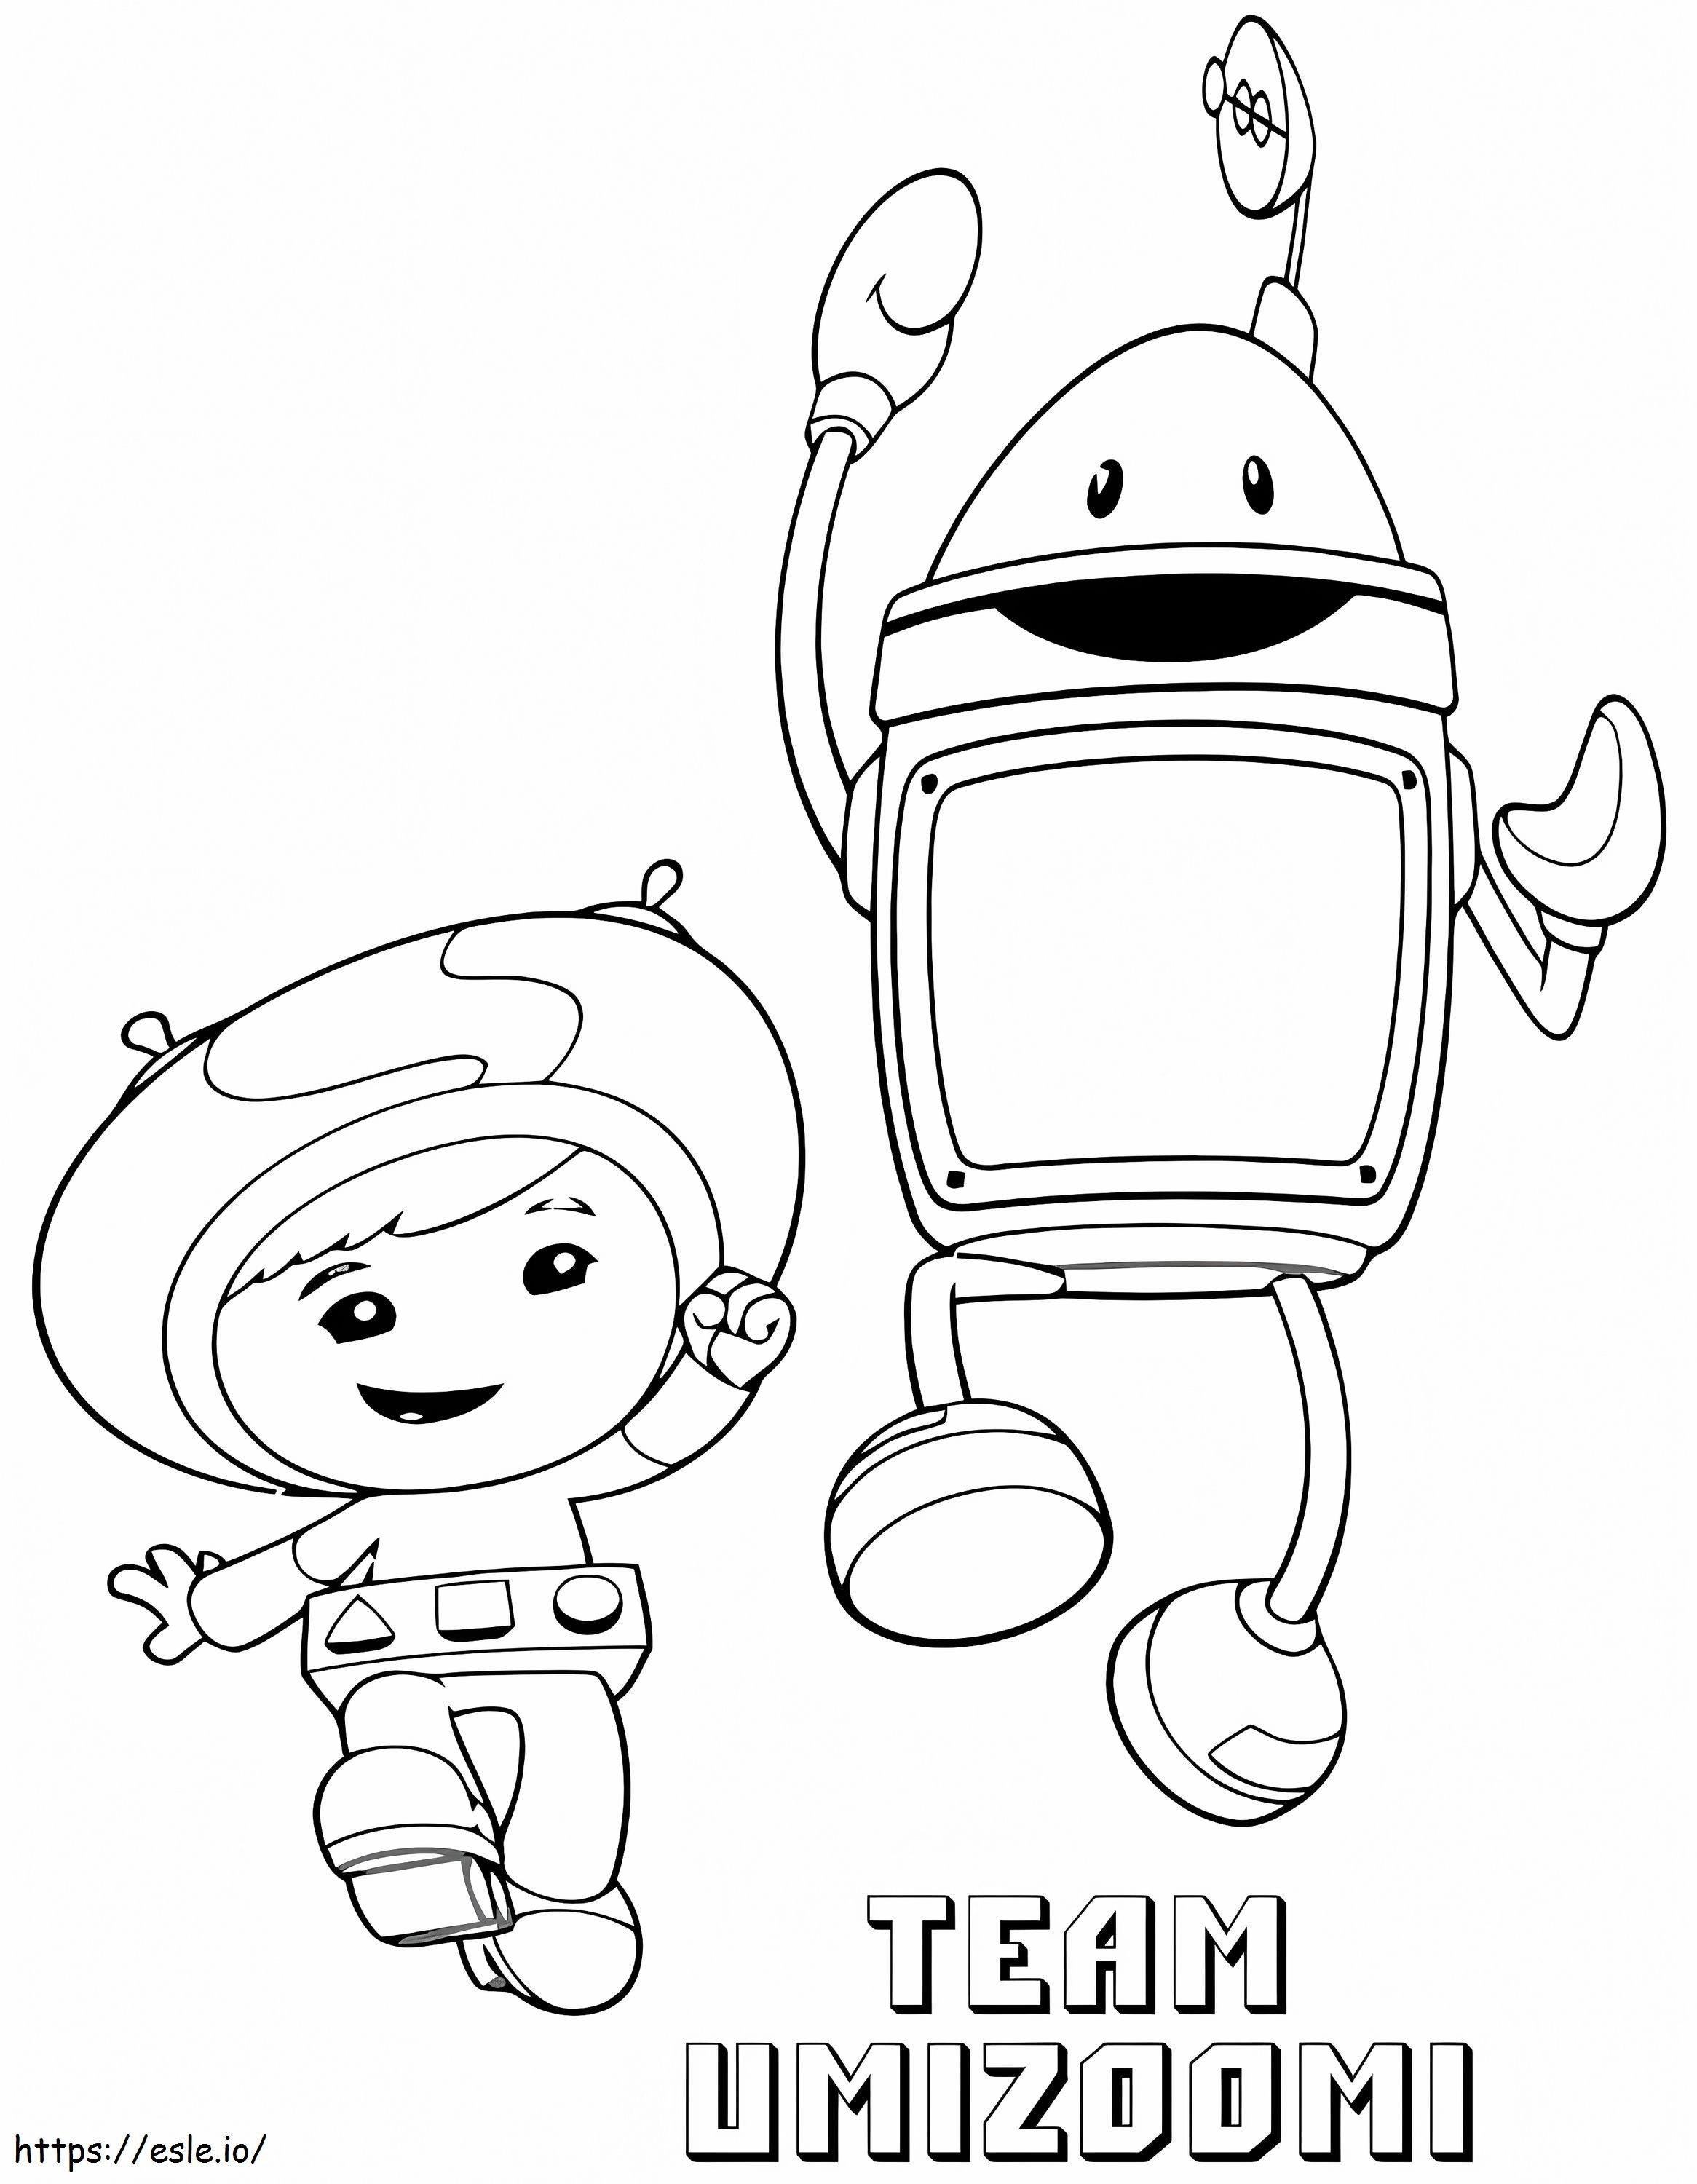 1598487827 Umizoomi8 coloring page